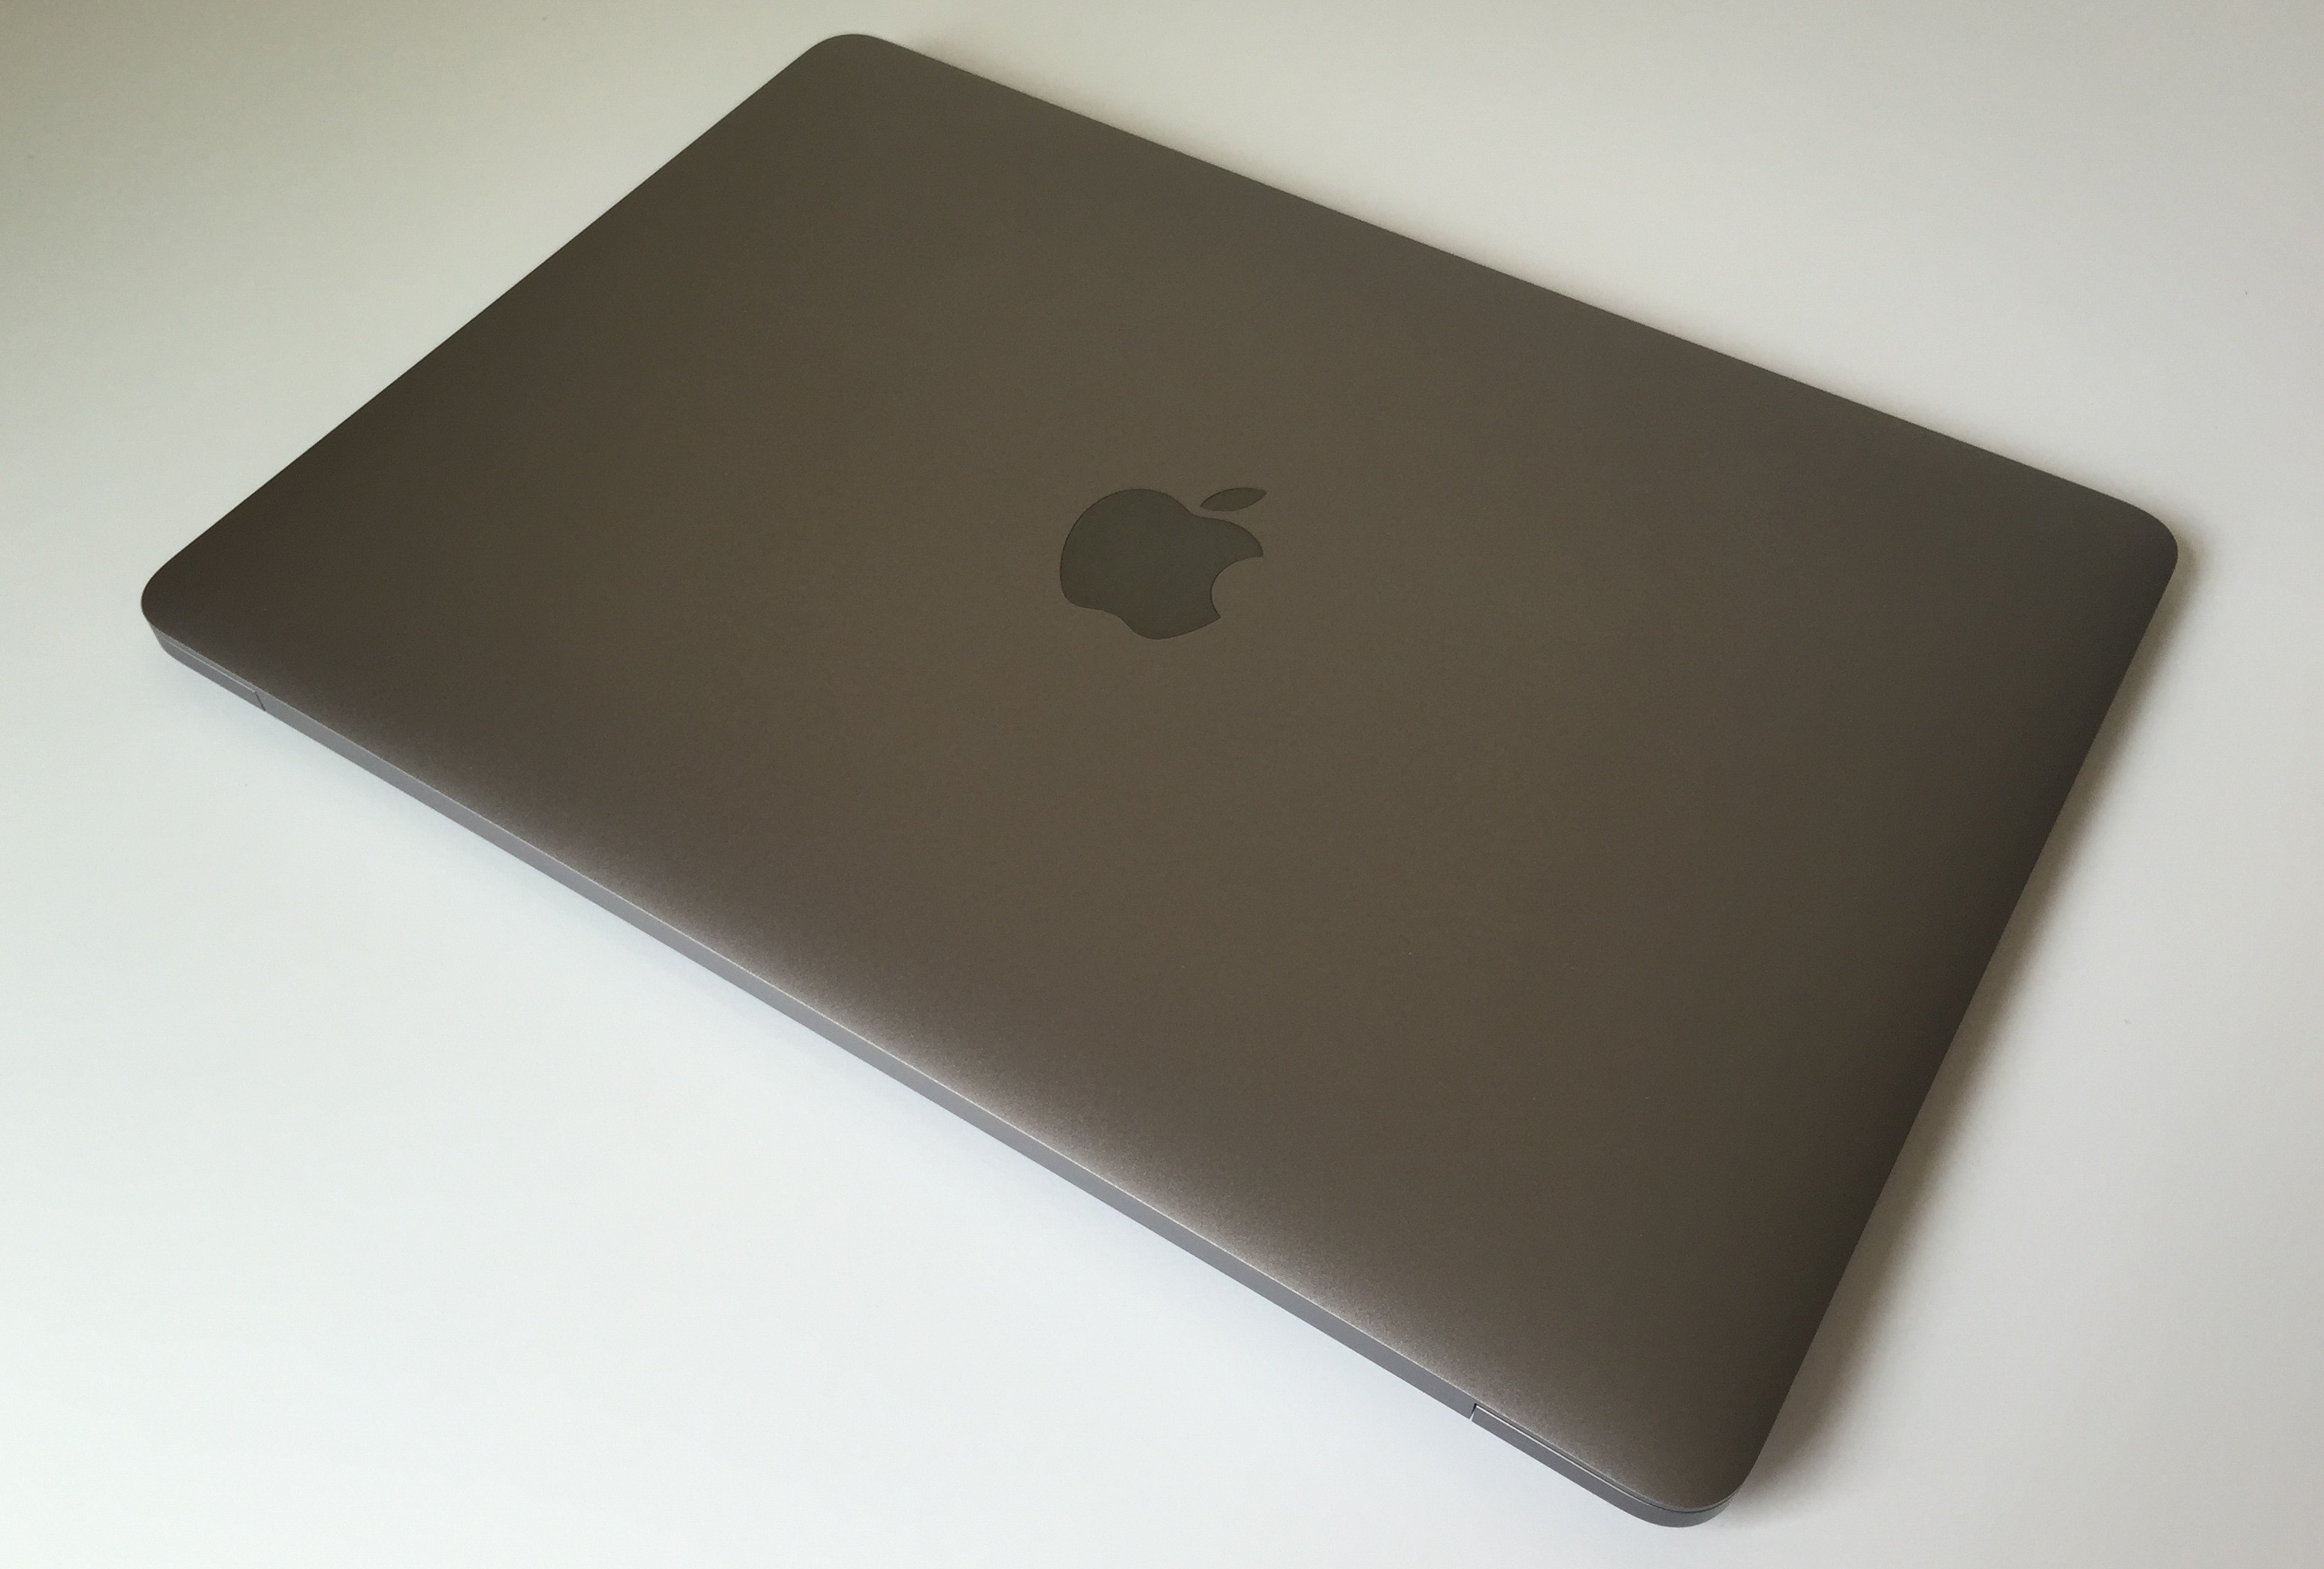 All Apple Stores to begin stocking 12-inch MacBook at end of May - 9to5Mac